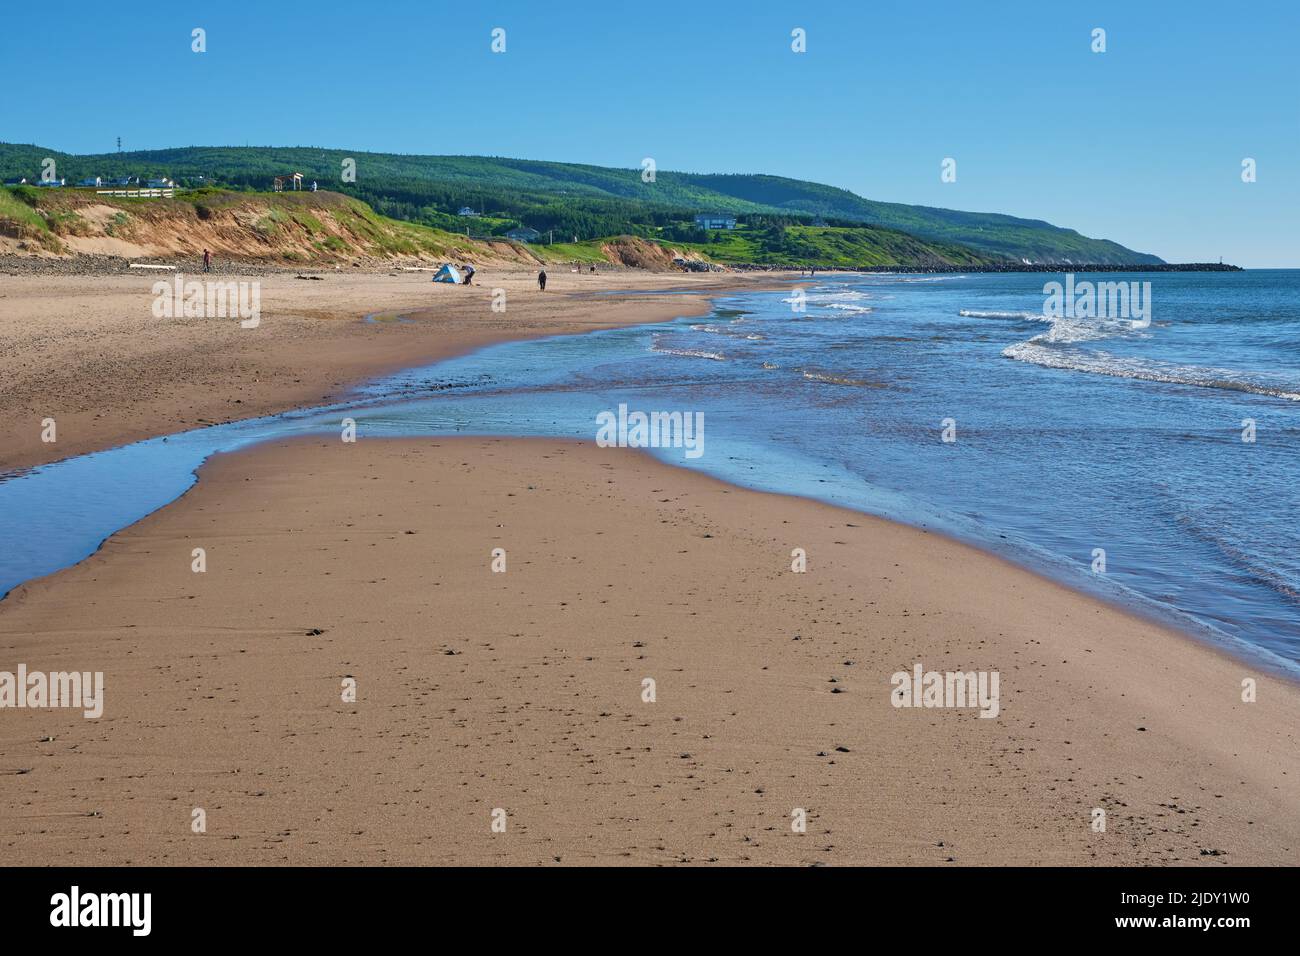 The beautiful beach in Inverness Cape Breton Nova Scotia photographed as the tide goes out. Stock Photo